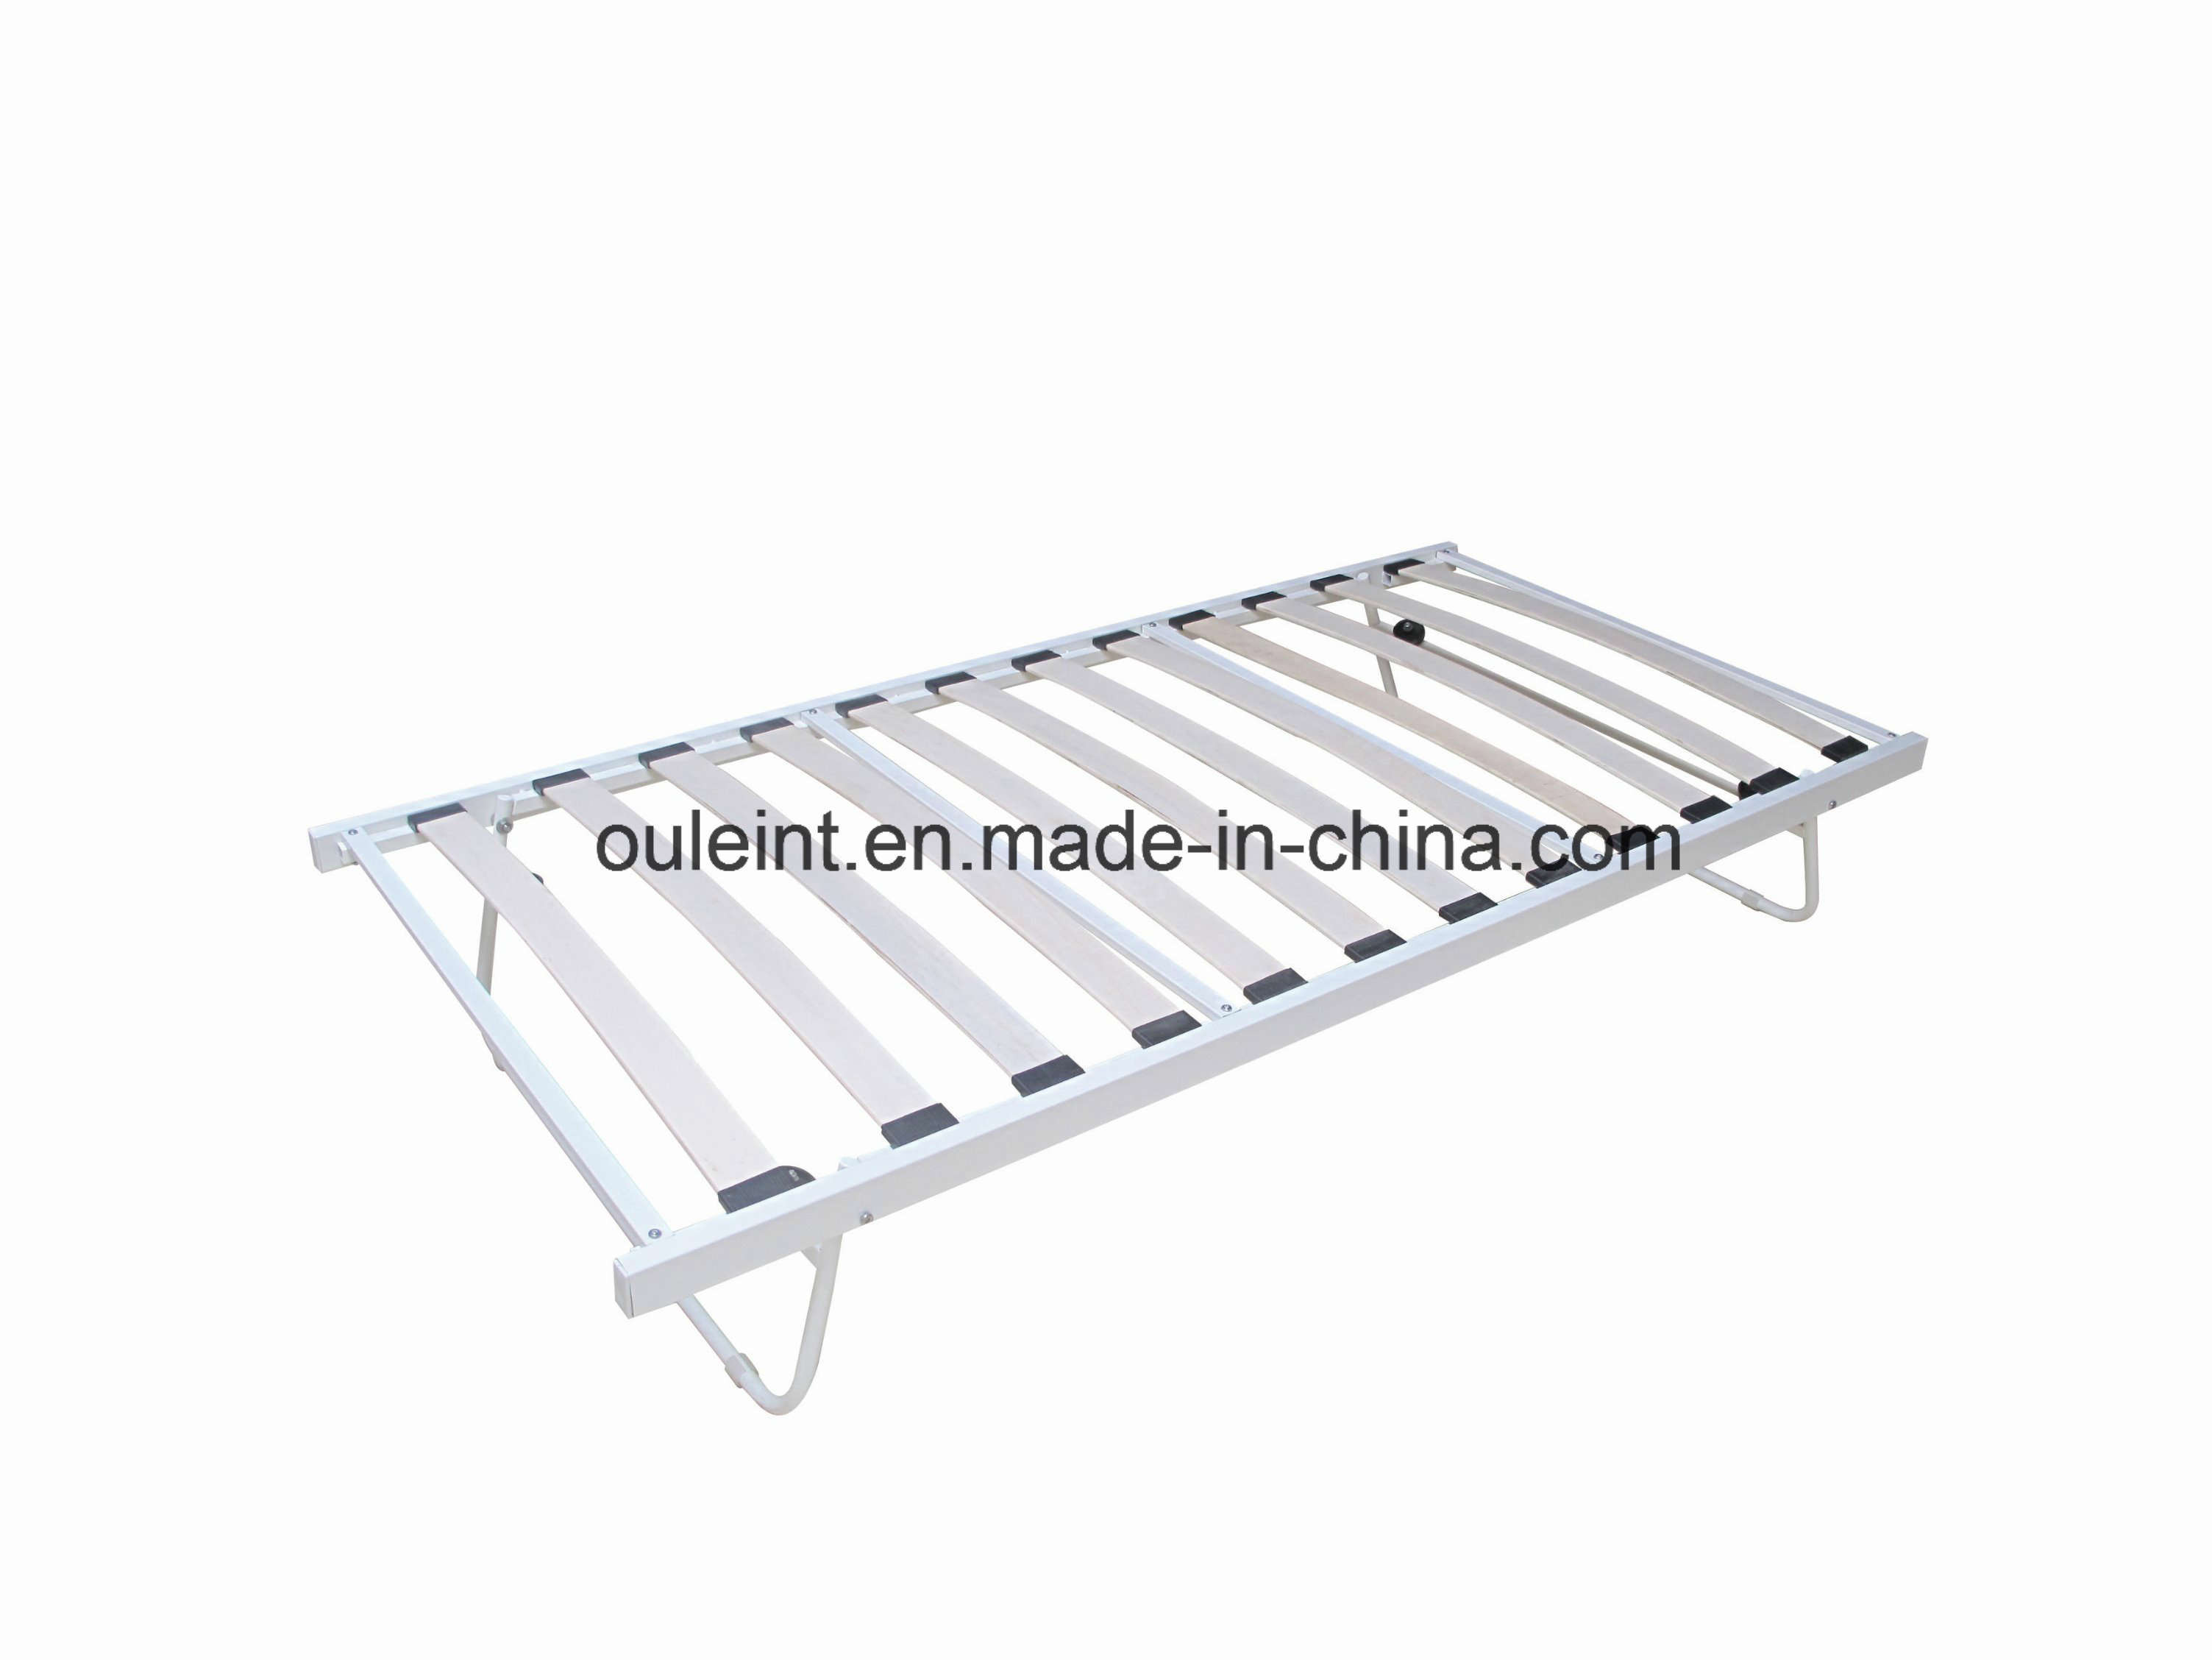 Folding Guest Bed with Wood Slats and Castors (OL1757)